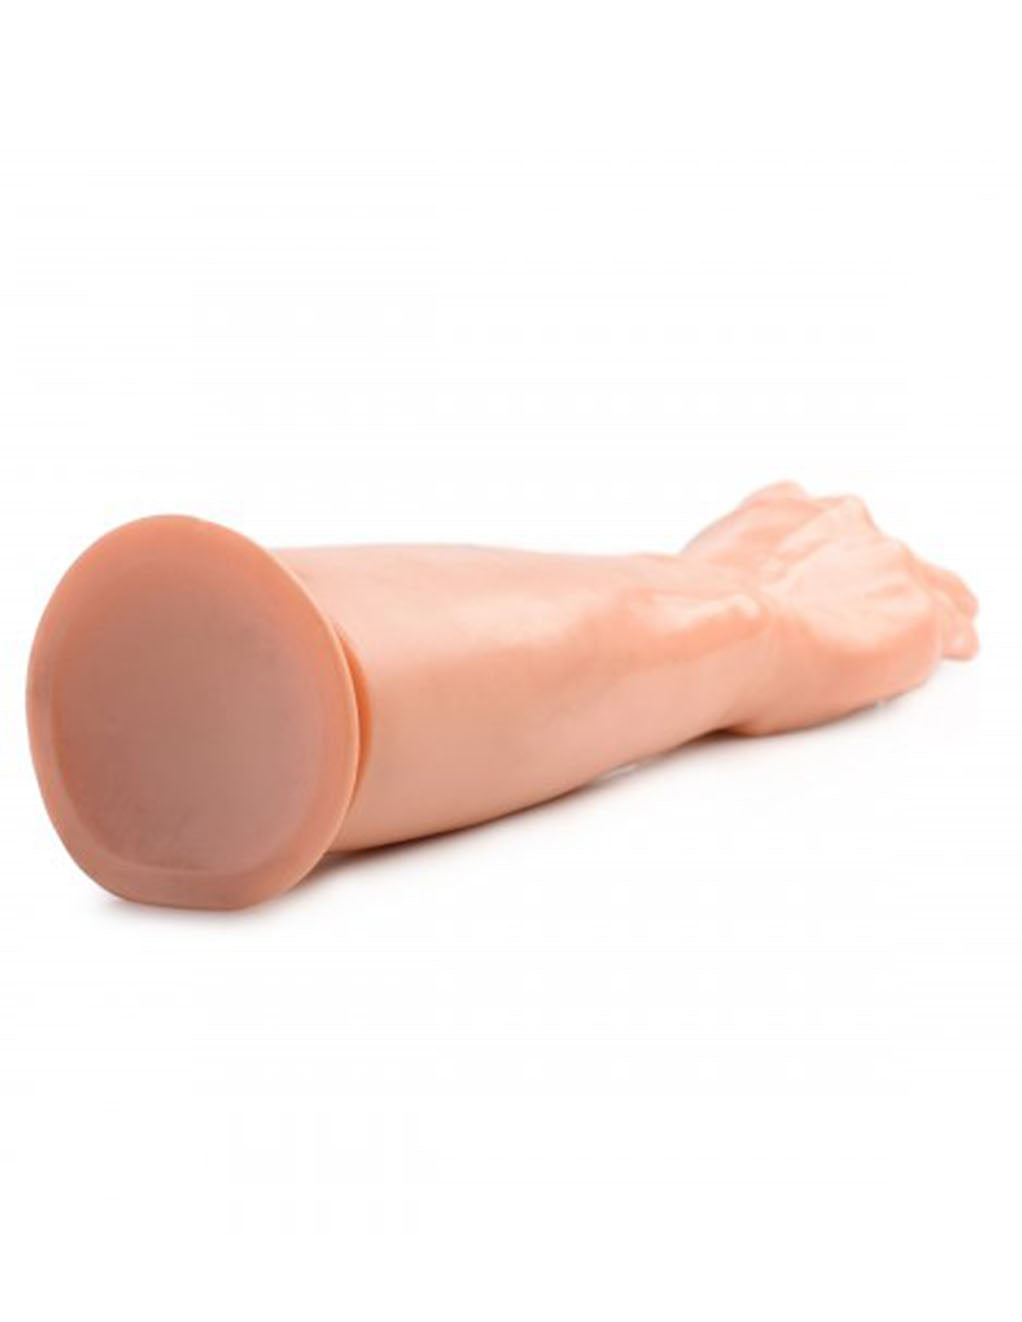 Master Series The Fister Hand and Forearm Dildo- Suction Cup